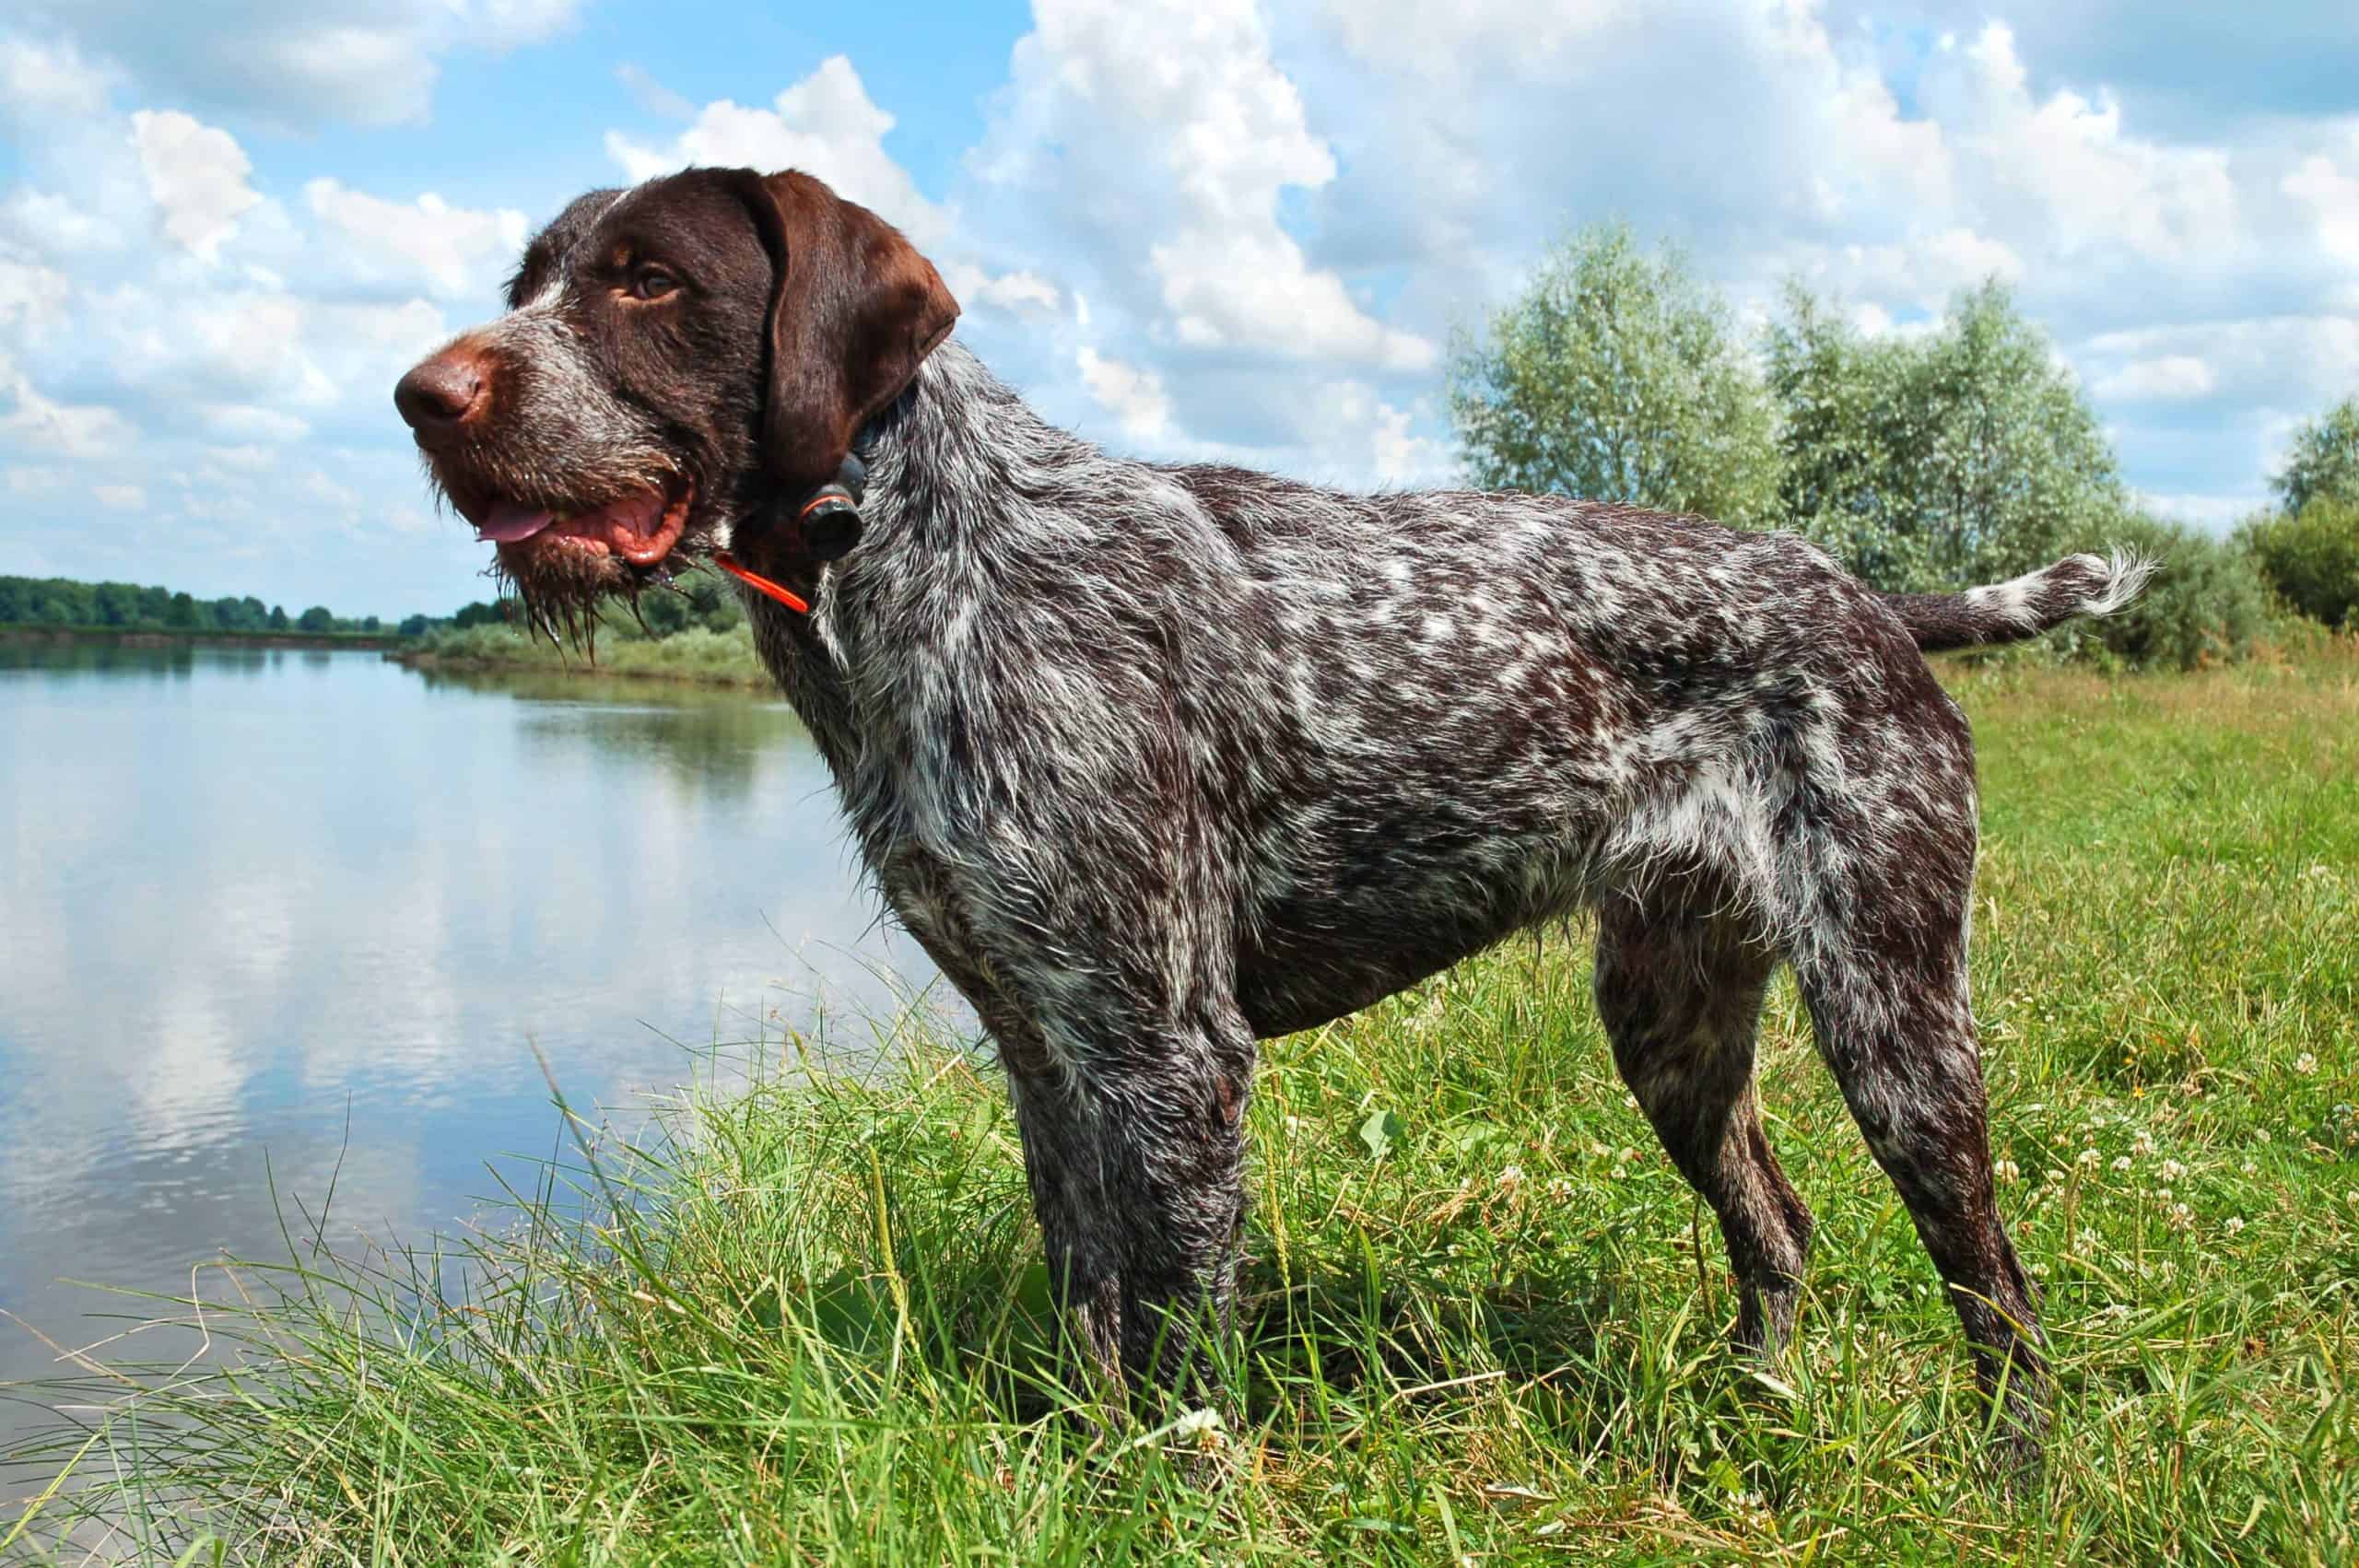 The German Wirehaired Pointer has excellent hunting instincts because they were bred specifically for this purpose.